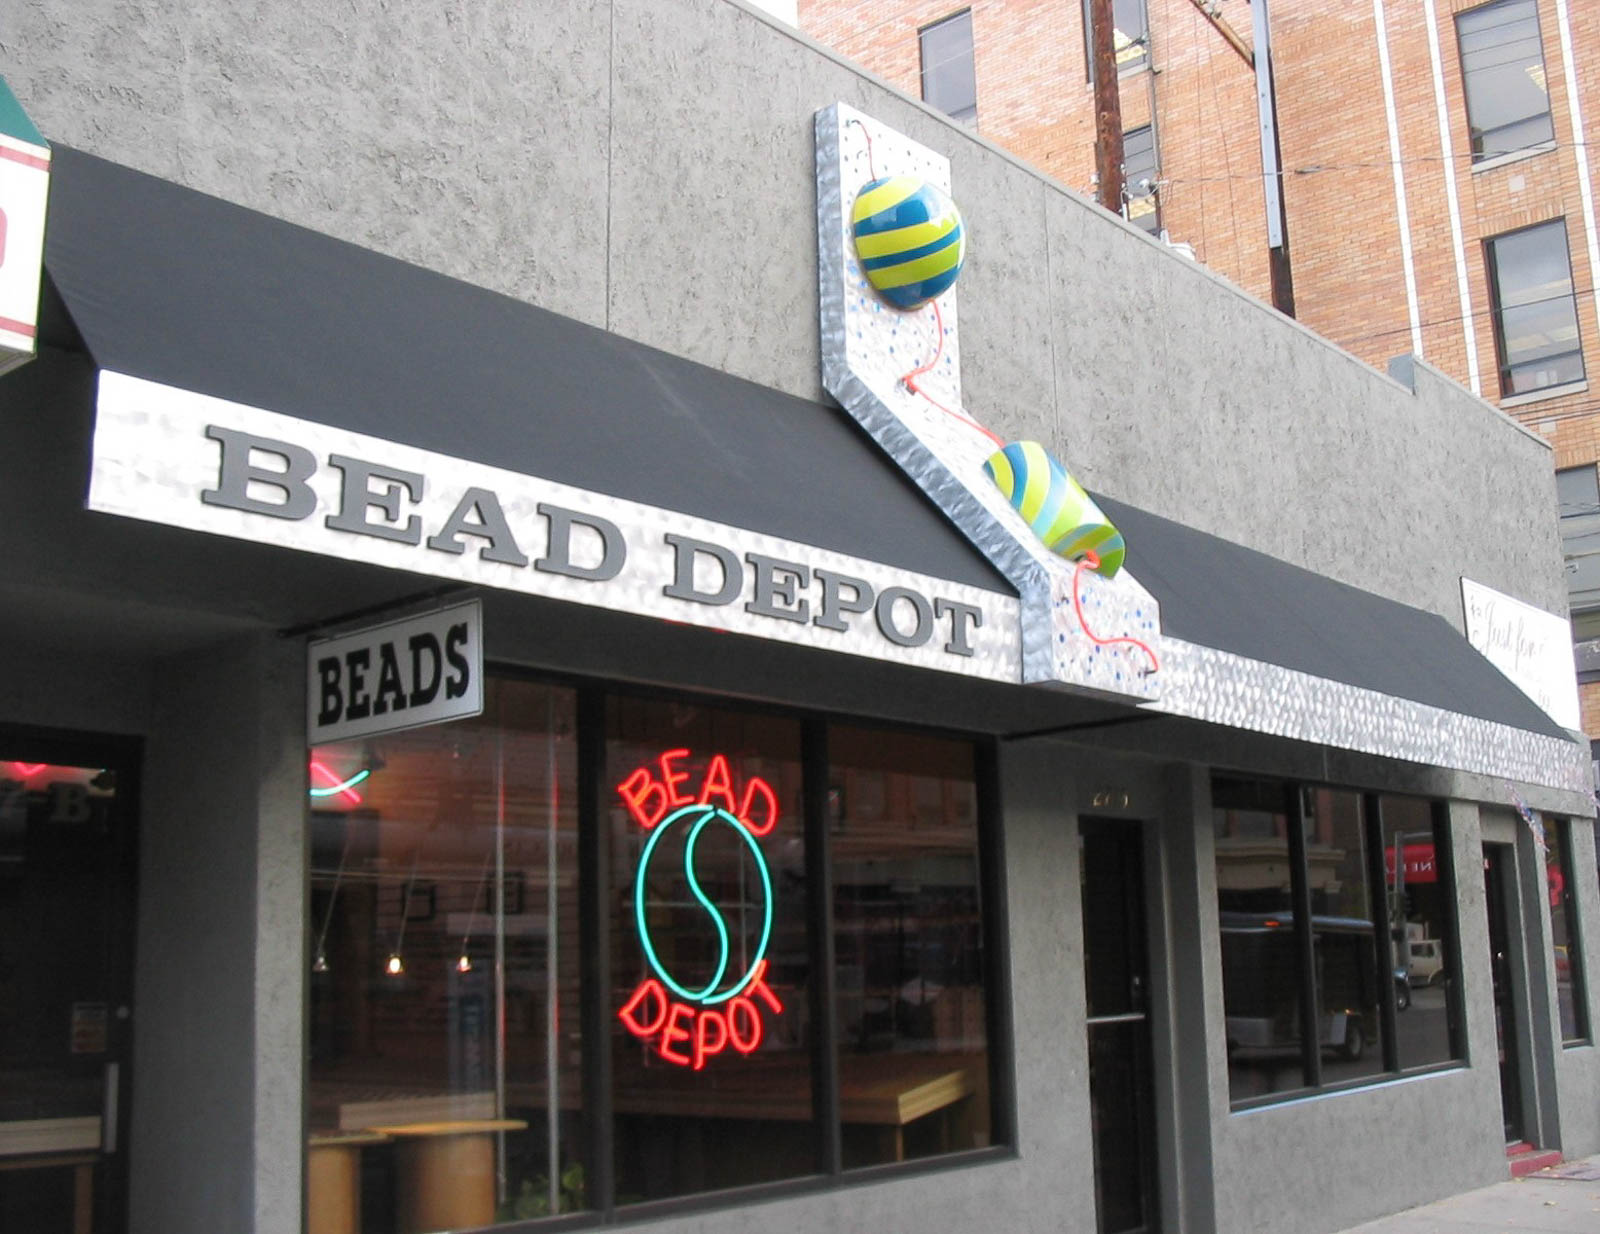 Awning for Bread Depot